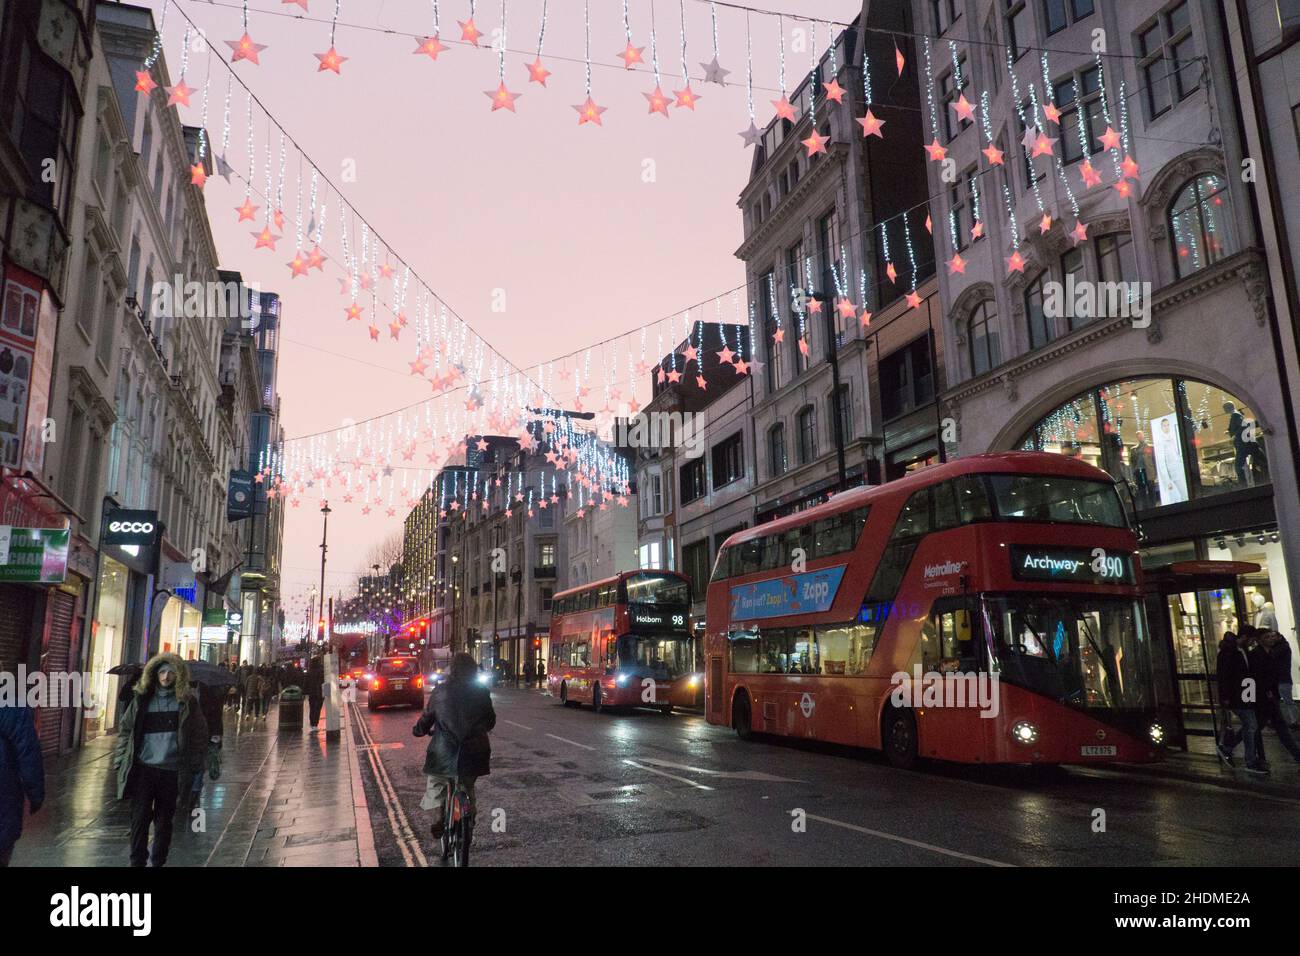 London, UK. 6th Jan, 2022. early evening shoppers on Oxford Street as the January sales continue. Footfall is sharply down from pre-pandemic levels but shops are open and customers are obliged to wear face masks under the Plan B regulations which are in place. Credit: Anna Watson/Alamy Live News Stock Photo